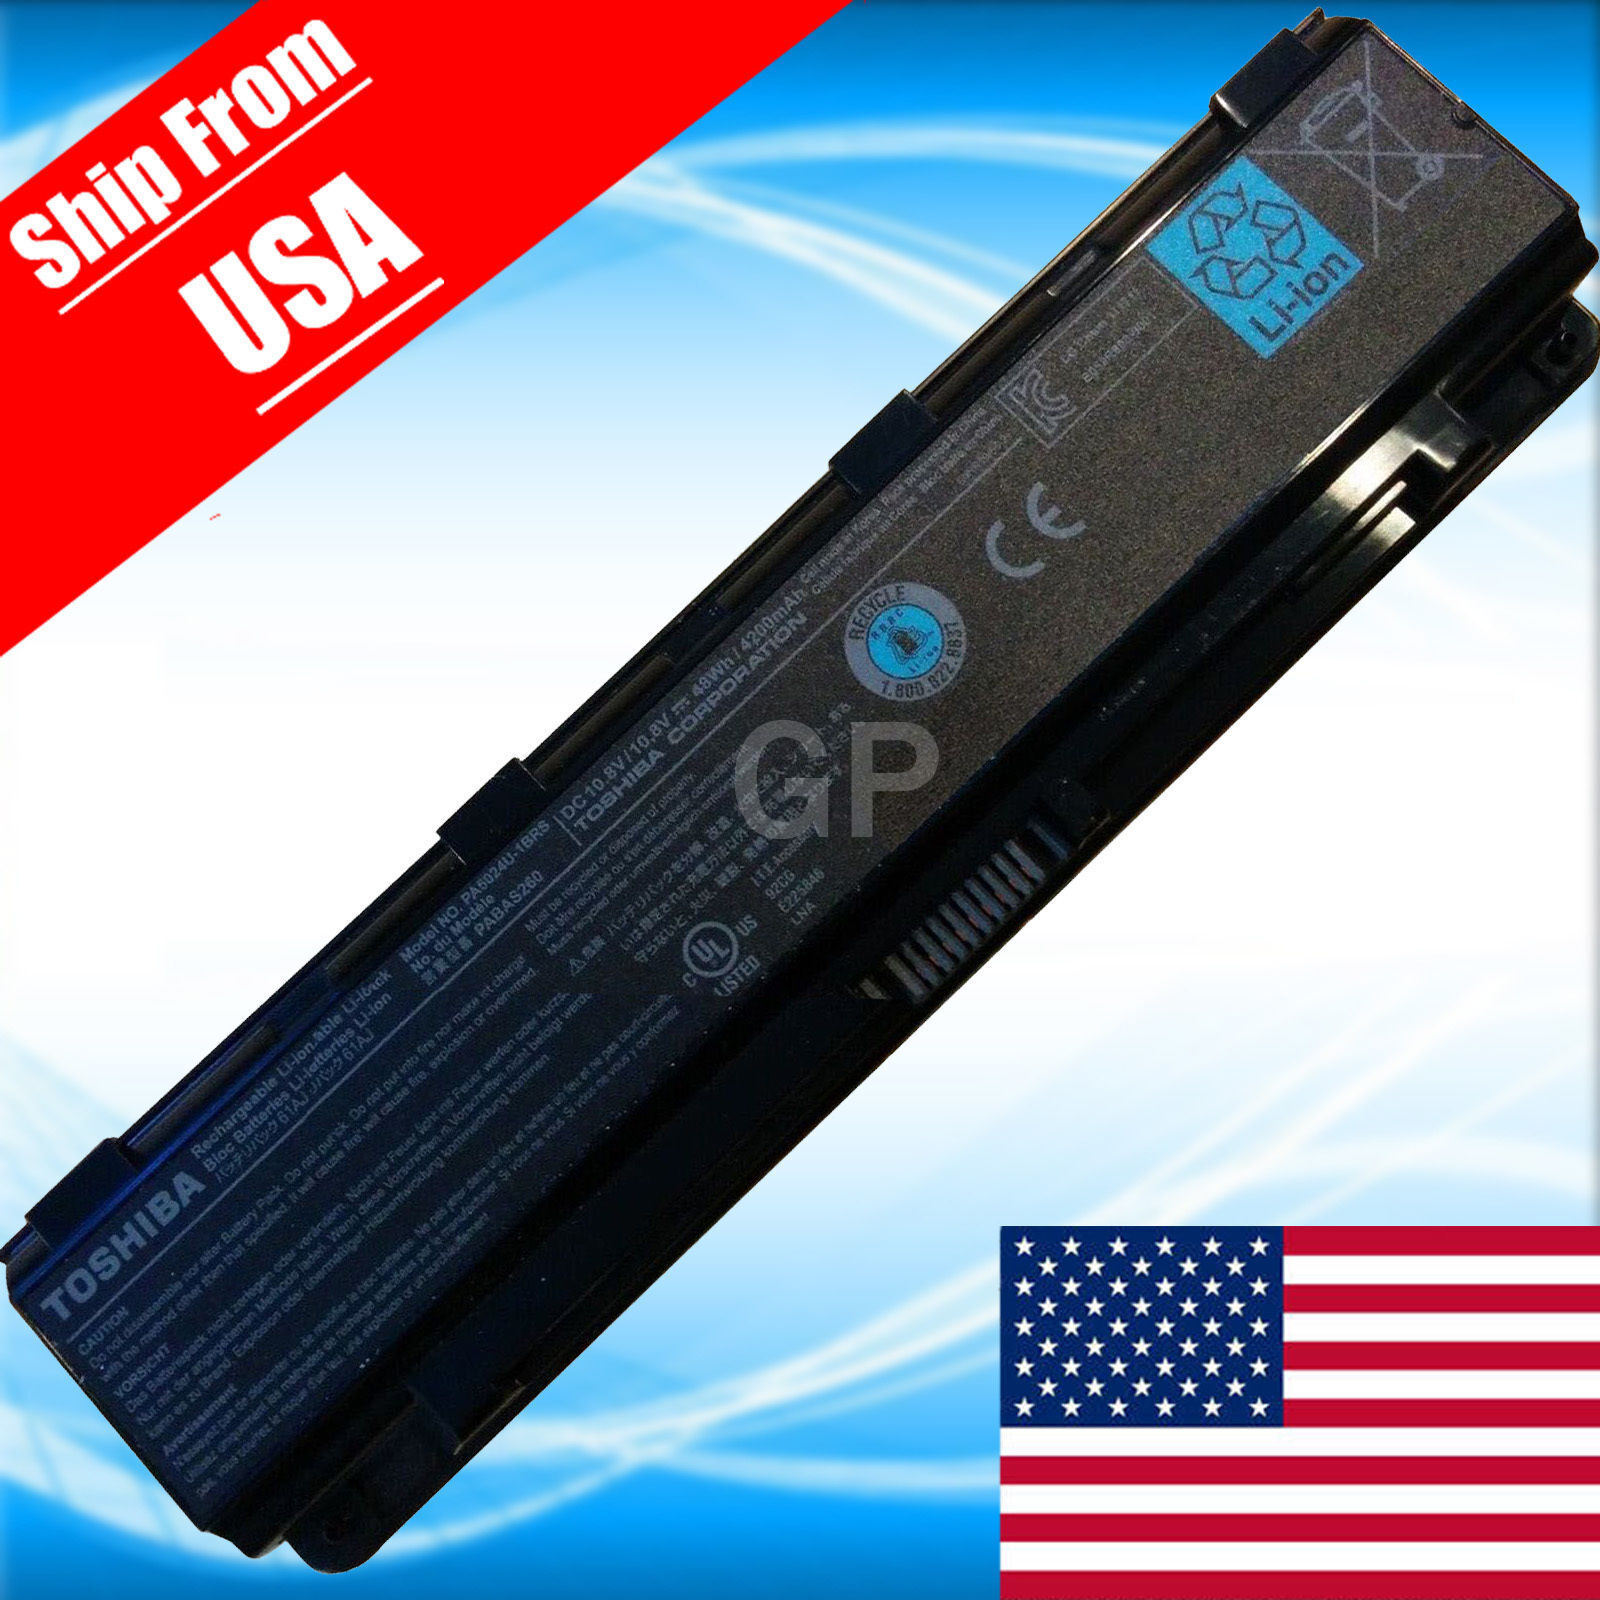 NEW  Genuine PA5024U-1BRS Notebook Battery FOR Toshiba Satellite C850 PABAS260